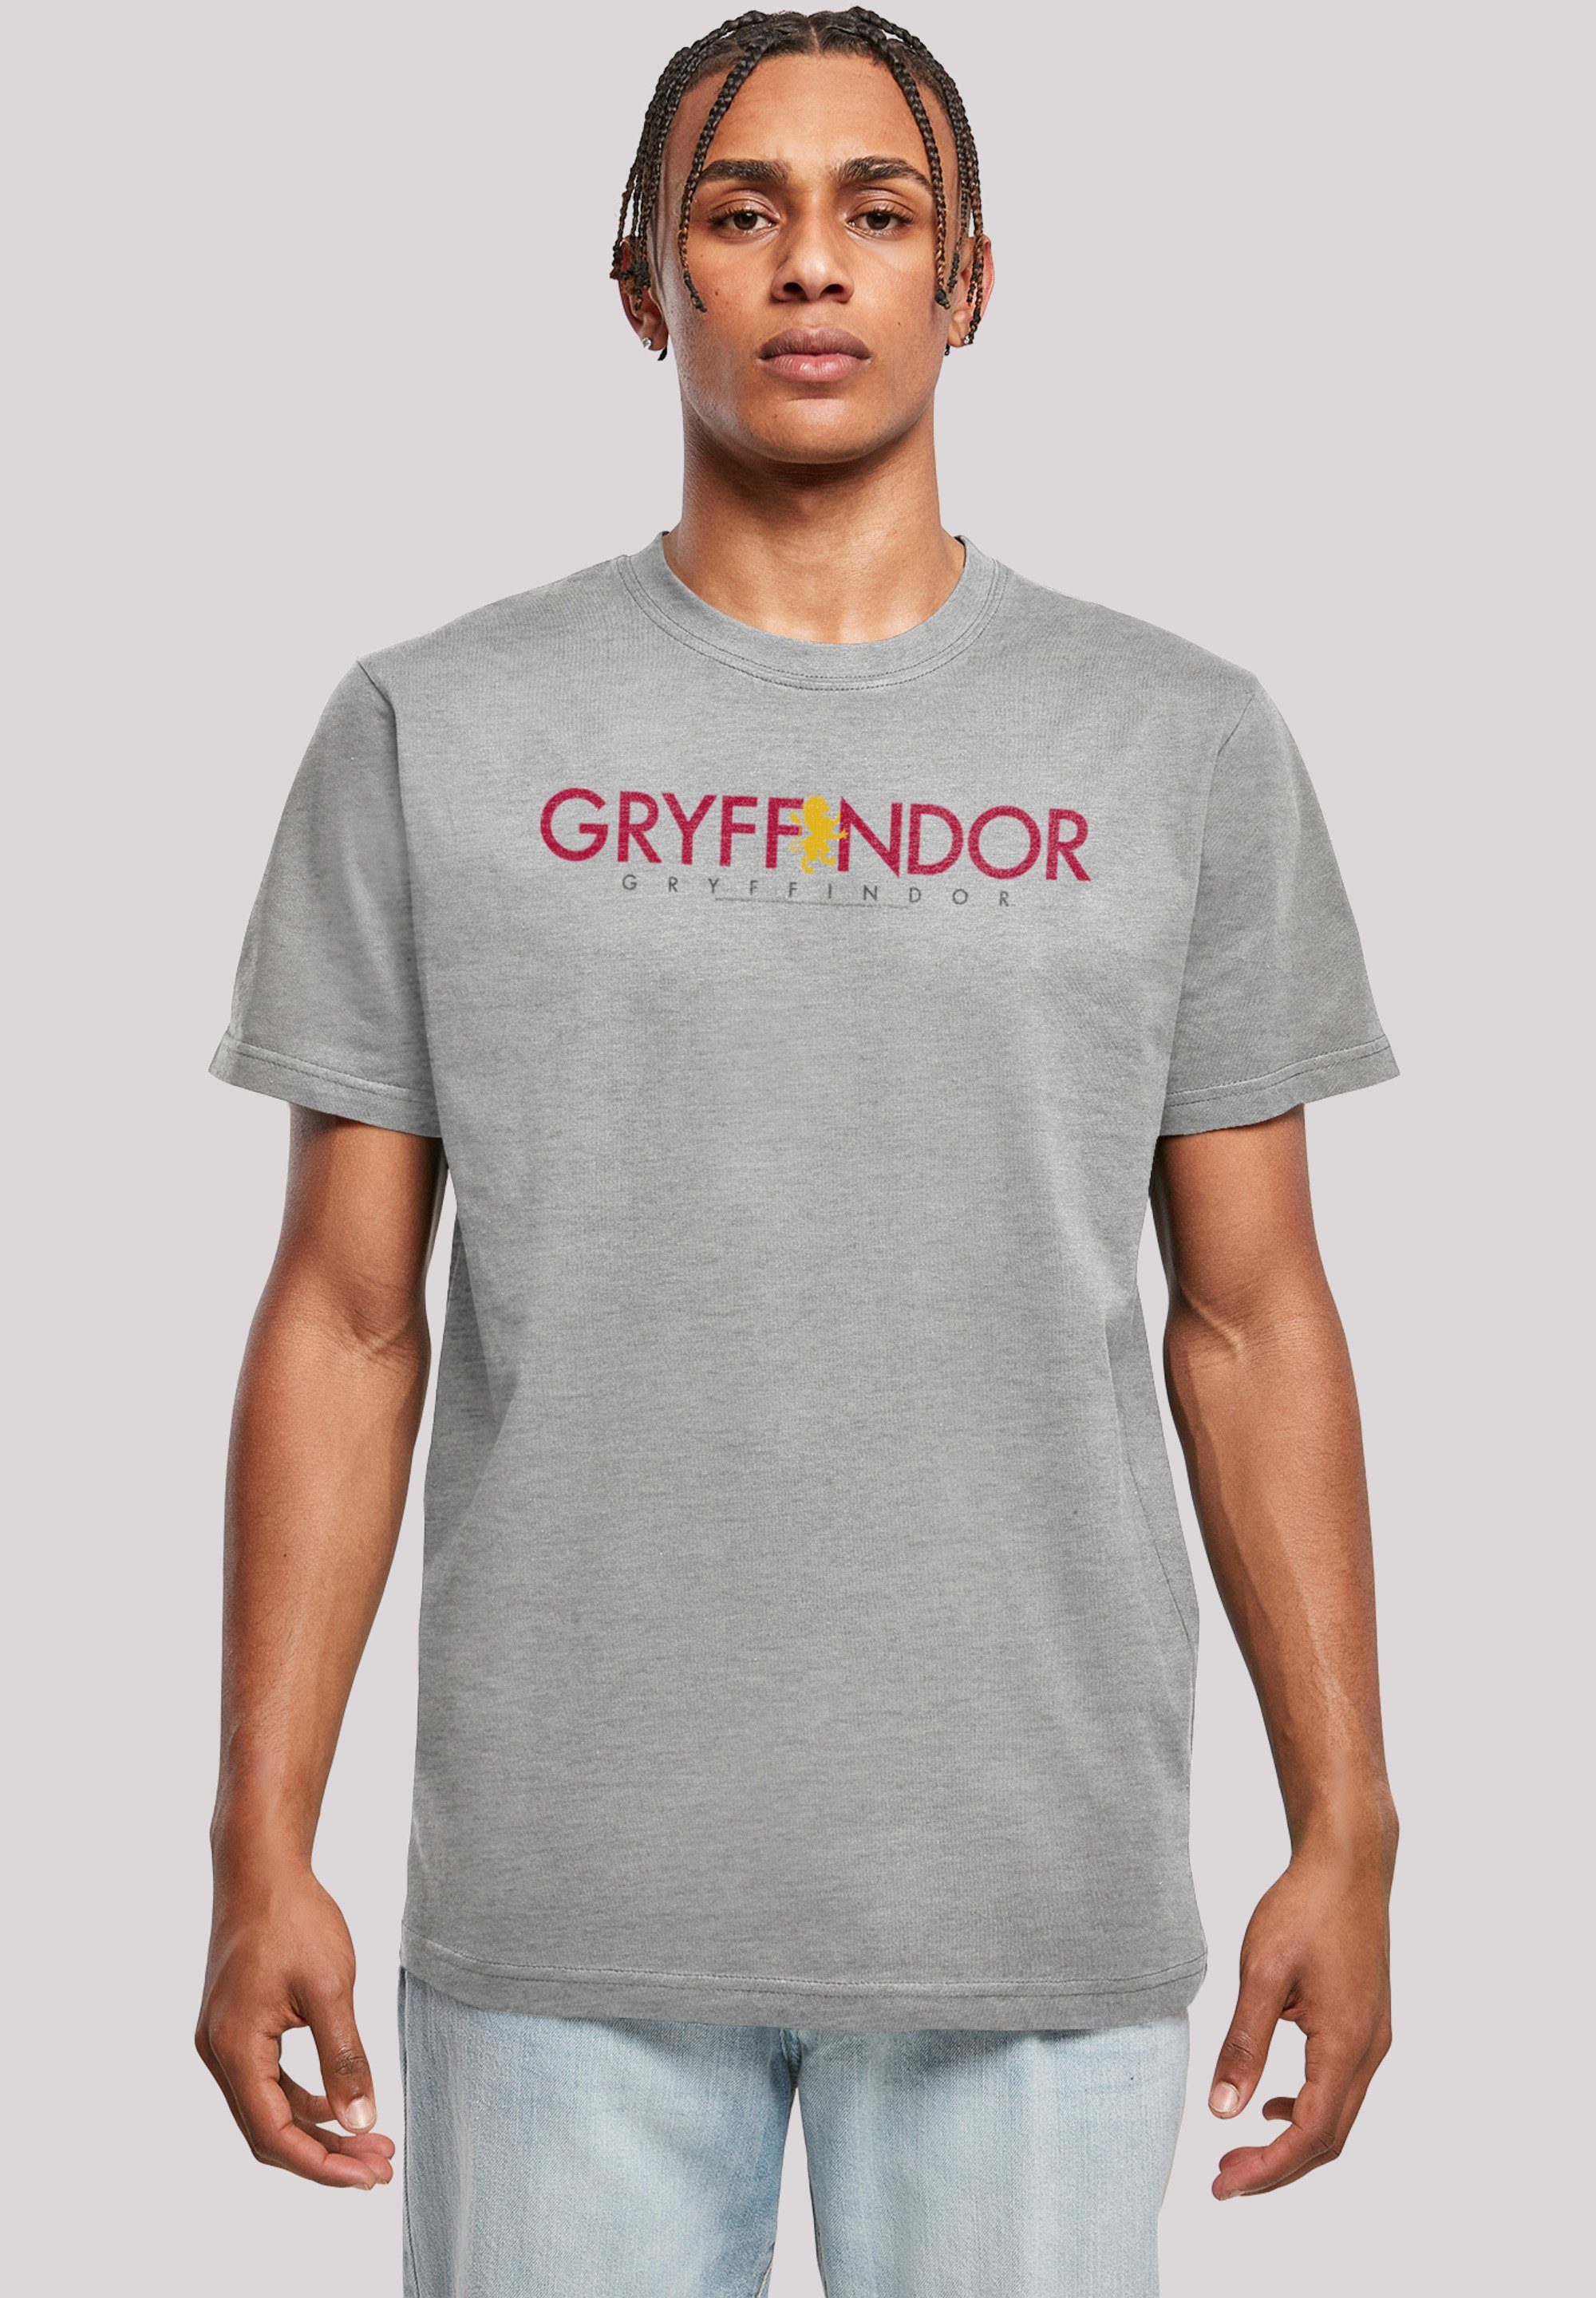 F4NT4STIC T-Shirt heather Potter Text Gryffindor grey Print Harry